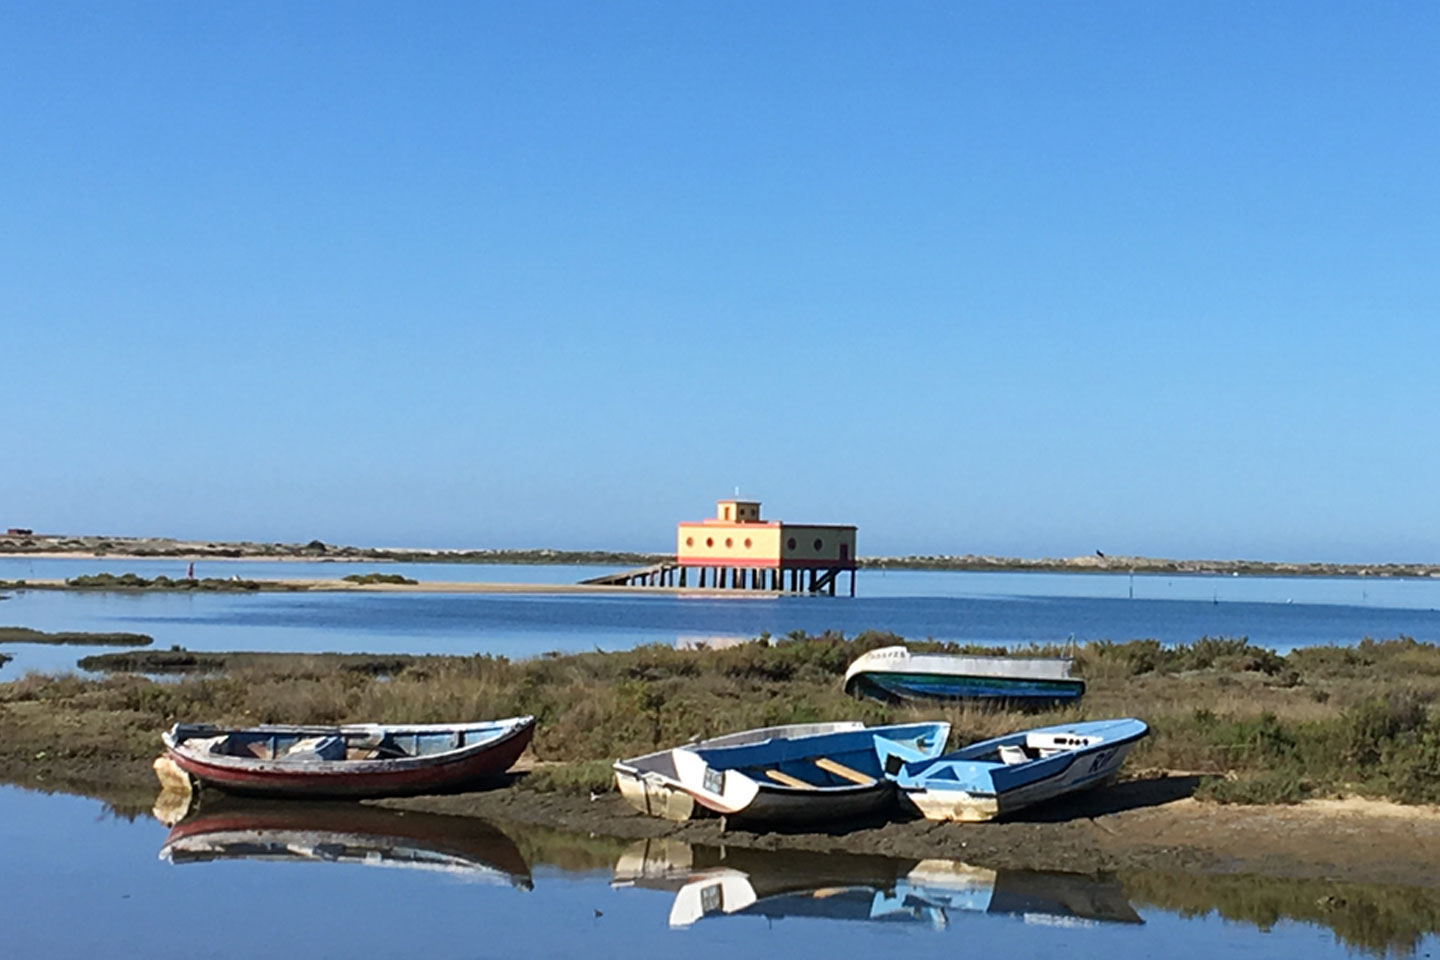 The abandoned Lifeboat Station in Fuseta with five small fishing boats lying in front of it